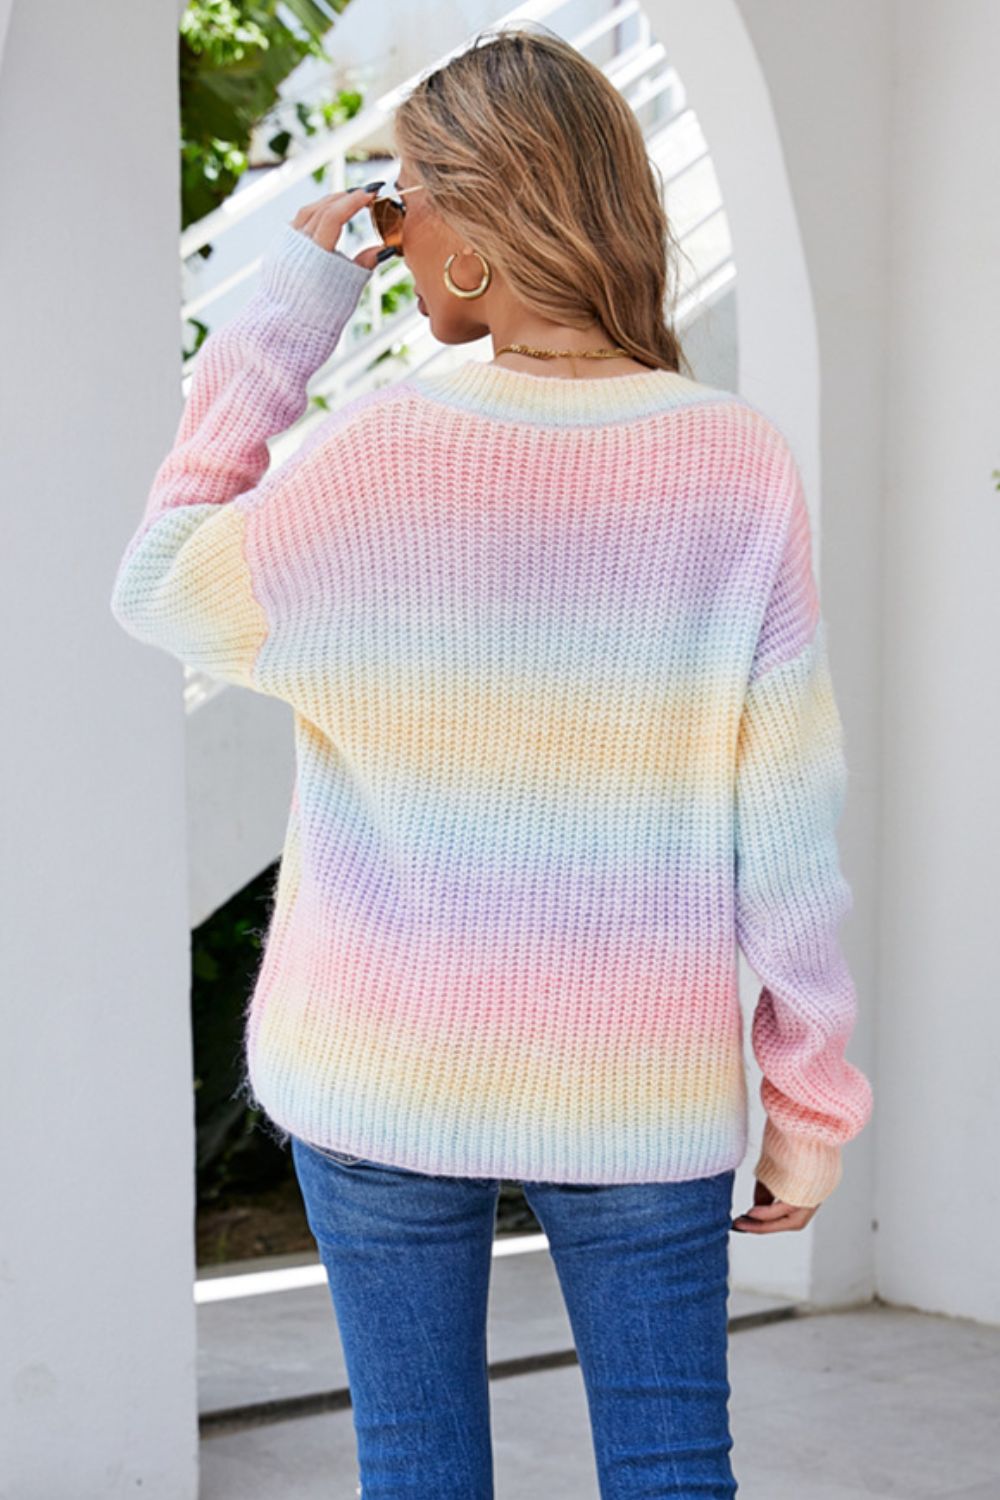 Candy Sweater Rib-Knit -Women’s multicolored sweater in pastel colors.#Firefly Lane Boutique1